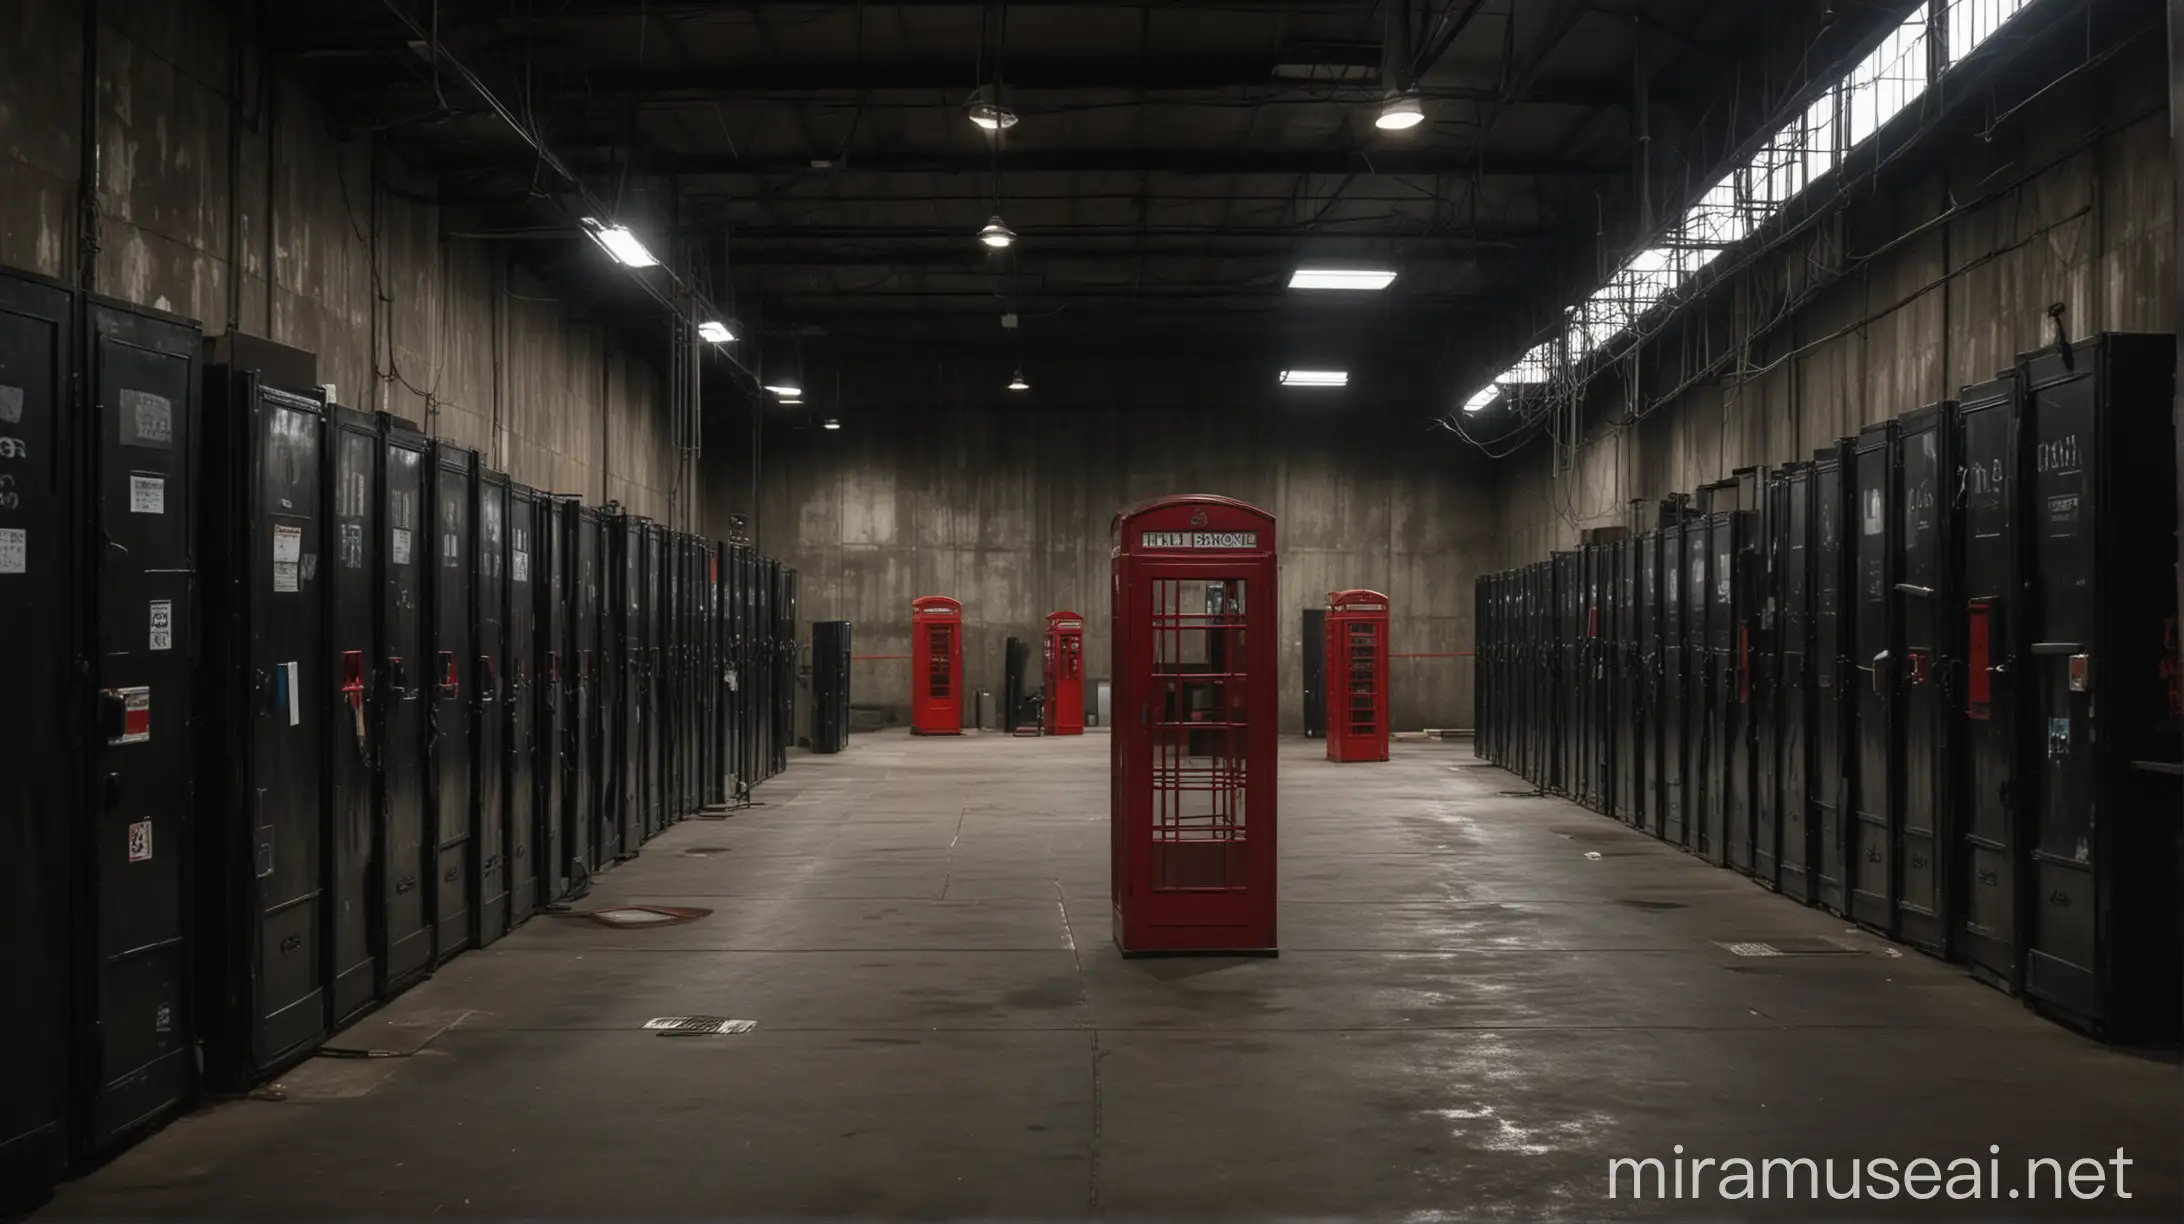 Mysterious Warehouse Interior with Red Phone Booth